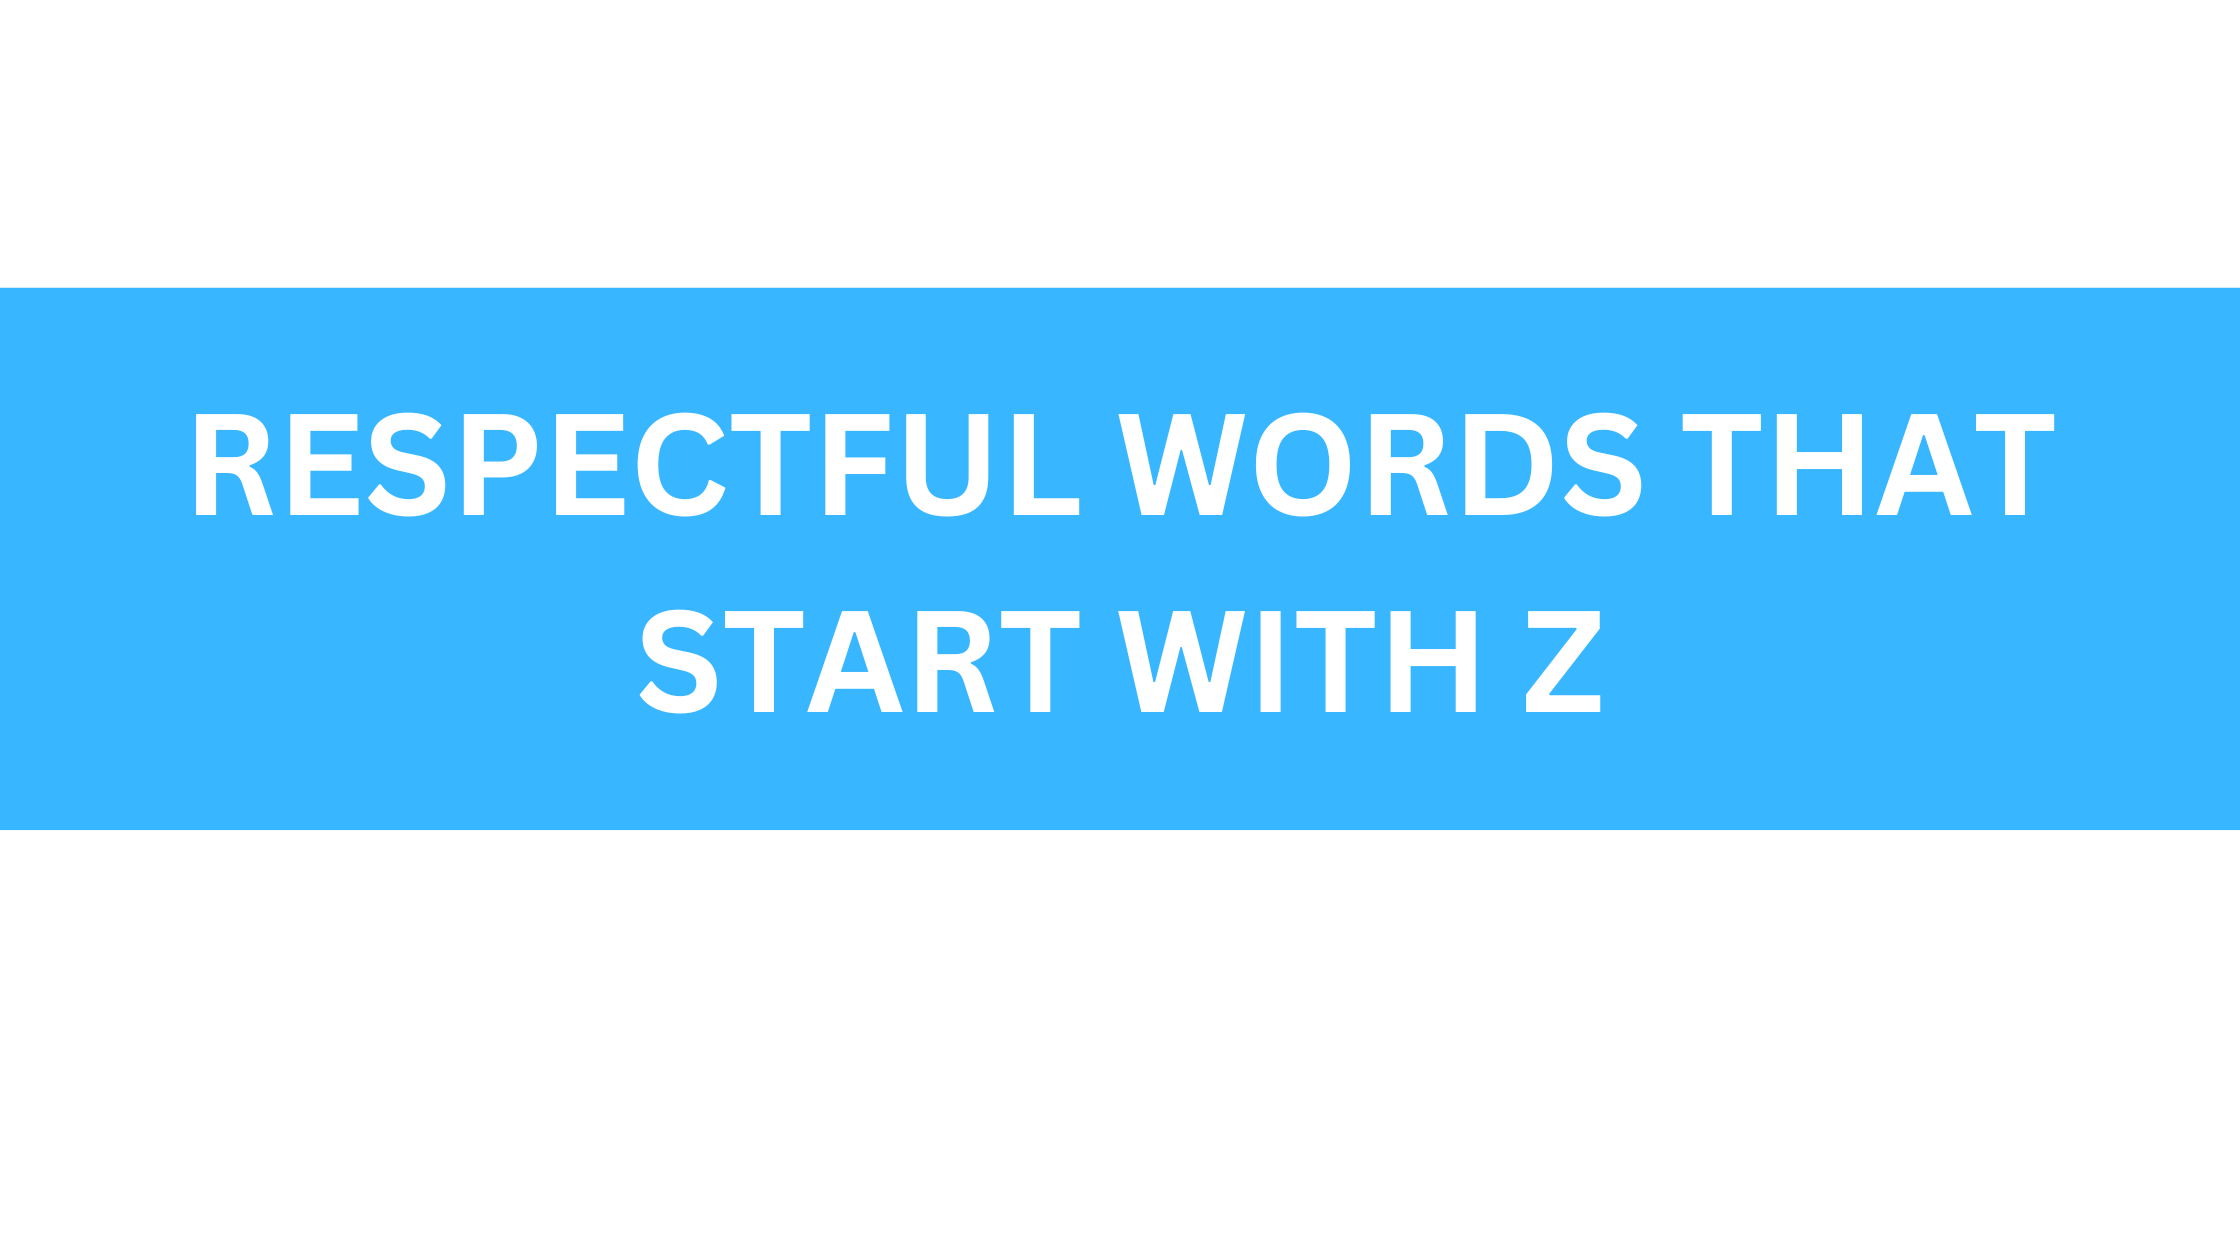 respectful words that start with z